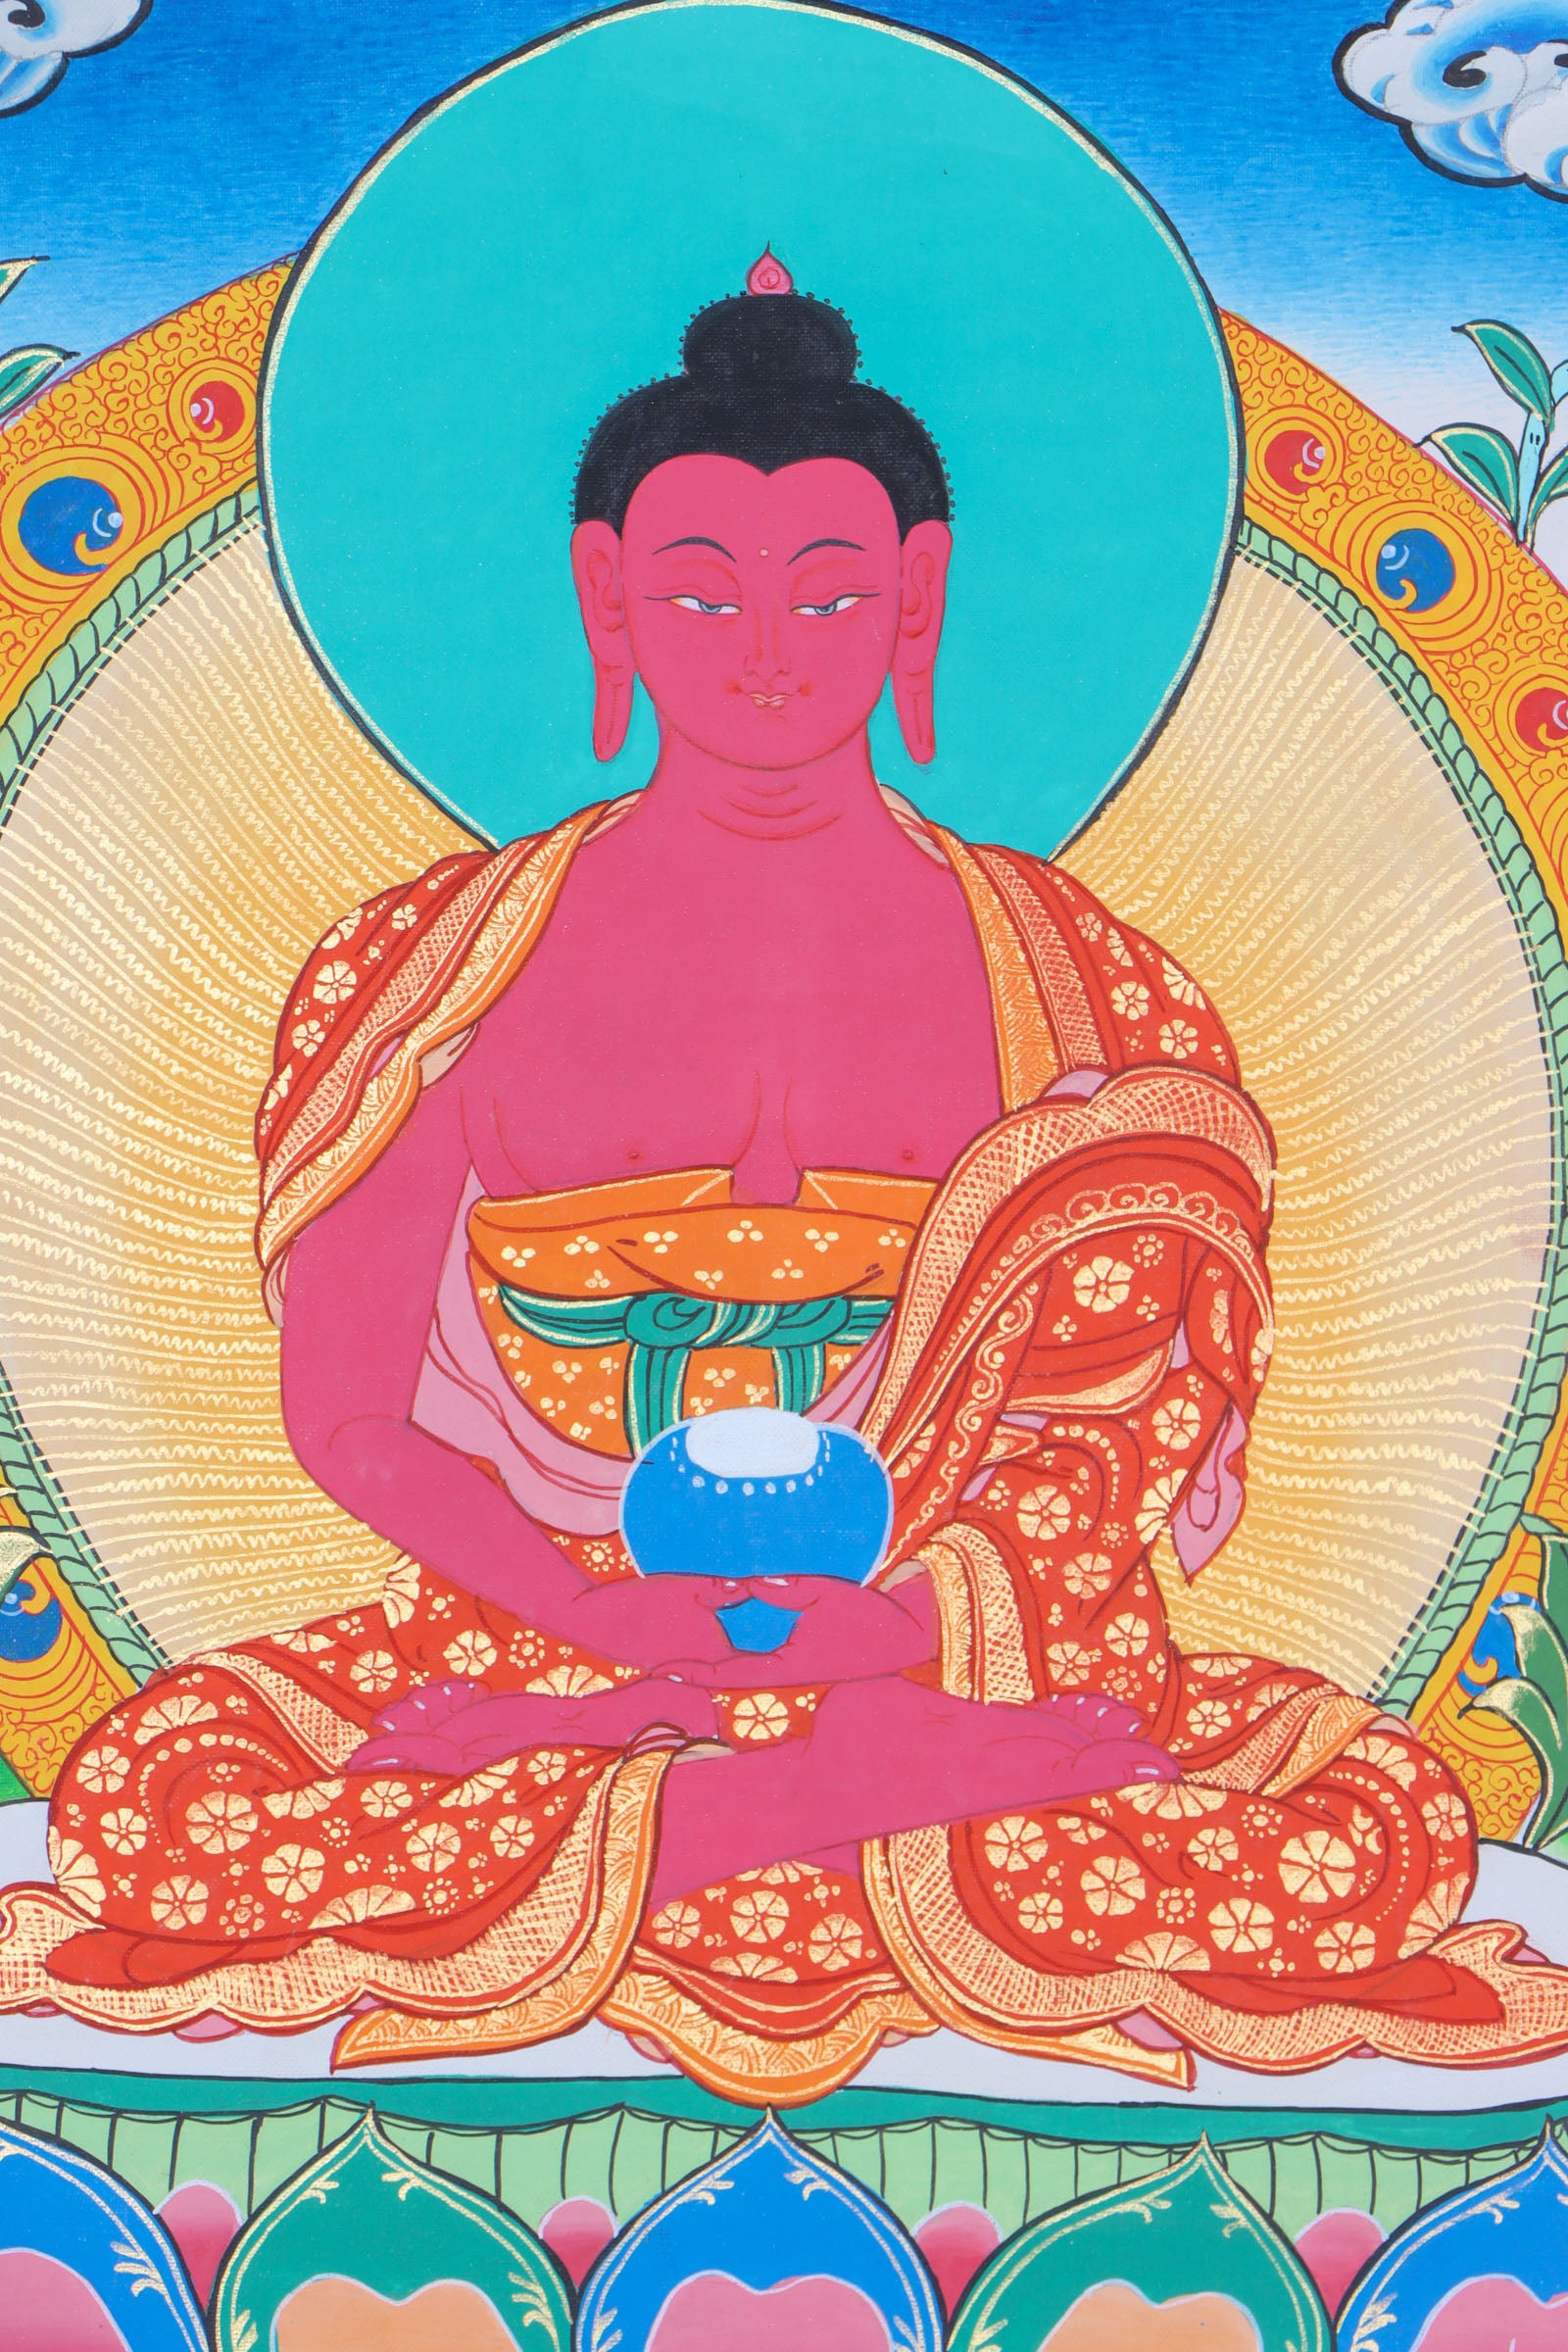 Amitabha Thangka holds deep spiritual significance within the context of Buddhist philosophy and practice